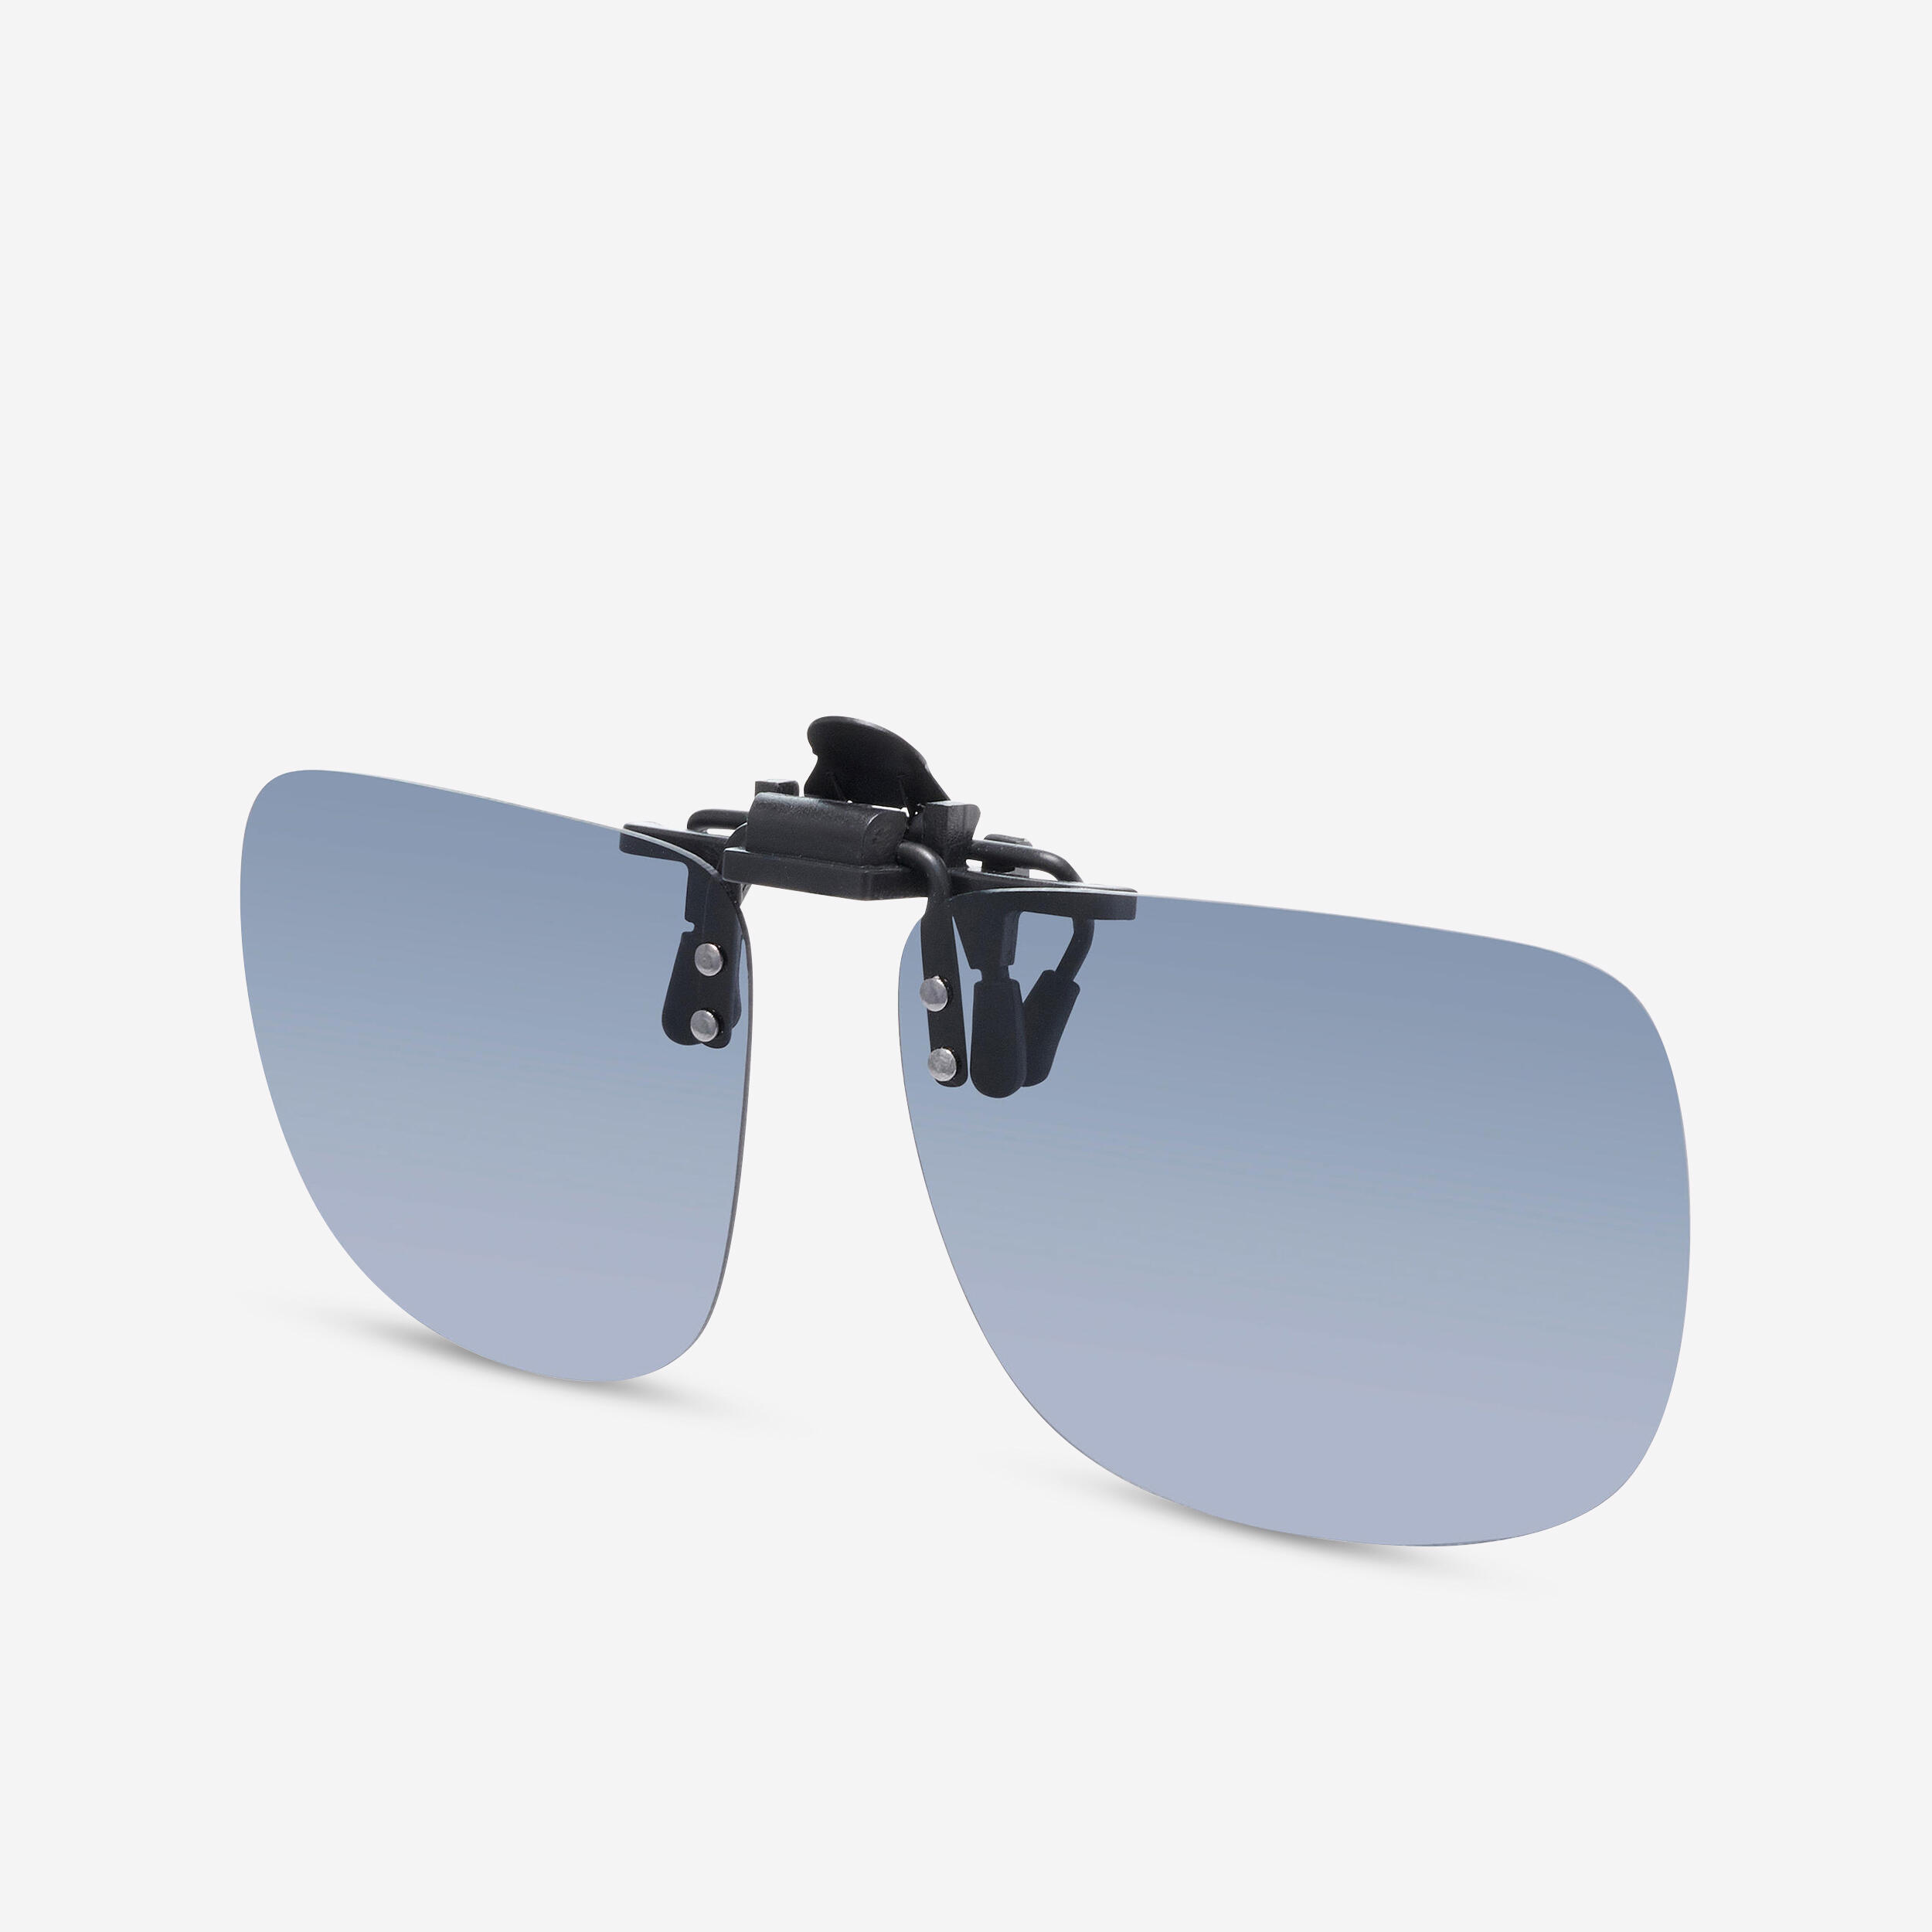 Cocoons Fitovers Canada - Clip-Ons REC1-52 Gunmetal Polarized Blue Mirror